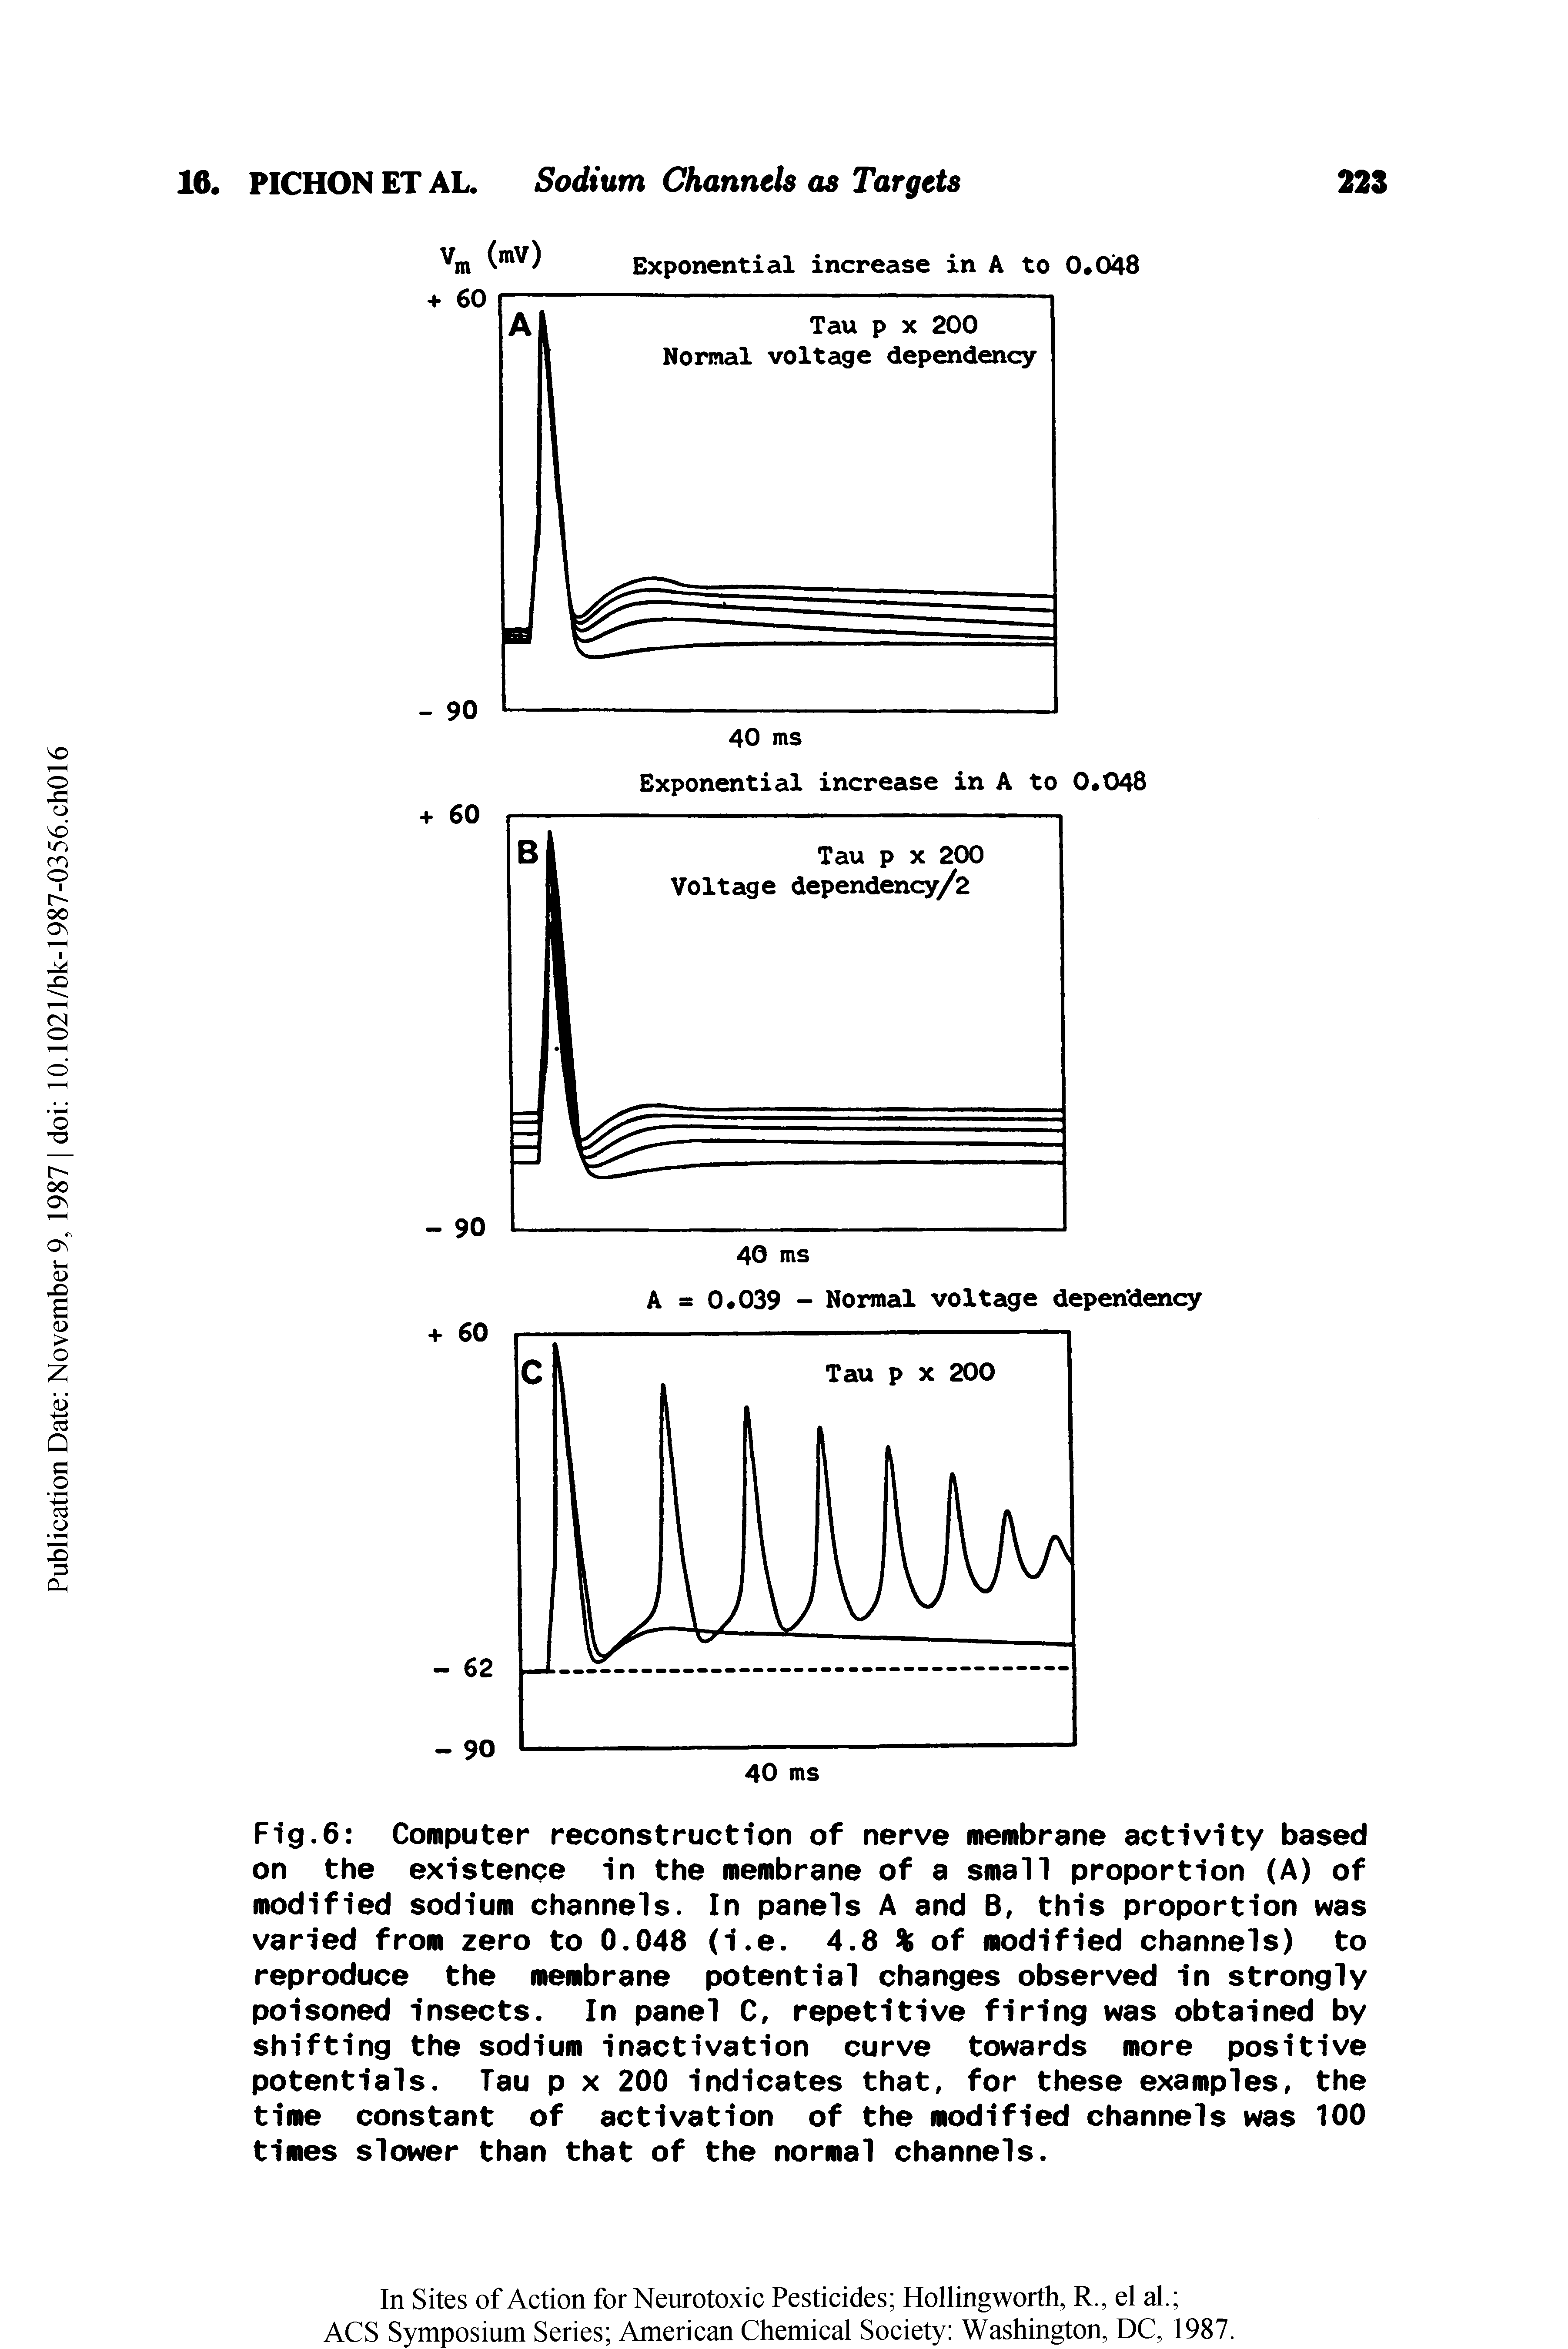 Fig.6 Computer reconstruction of nerve membrane activity based on the existence in the membrane of a small proportion (A) of modified sodium channels. In panels A and B, this proportion was varied from zero to 0.048 (i.e. 4.8 % of modified channels) to reproduce the membrane potential changes observed in strongly poisoned insects. In panel C, repetitive firing was obtained by shifting the sodium inactivation curve towards more positive potentials. Tau p x 200 indicates that, for these examples, the time constant of activation of the modified channels was 100 times slower than that of the normal channels.